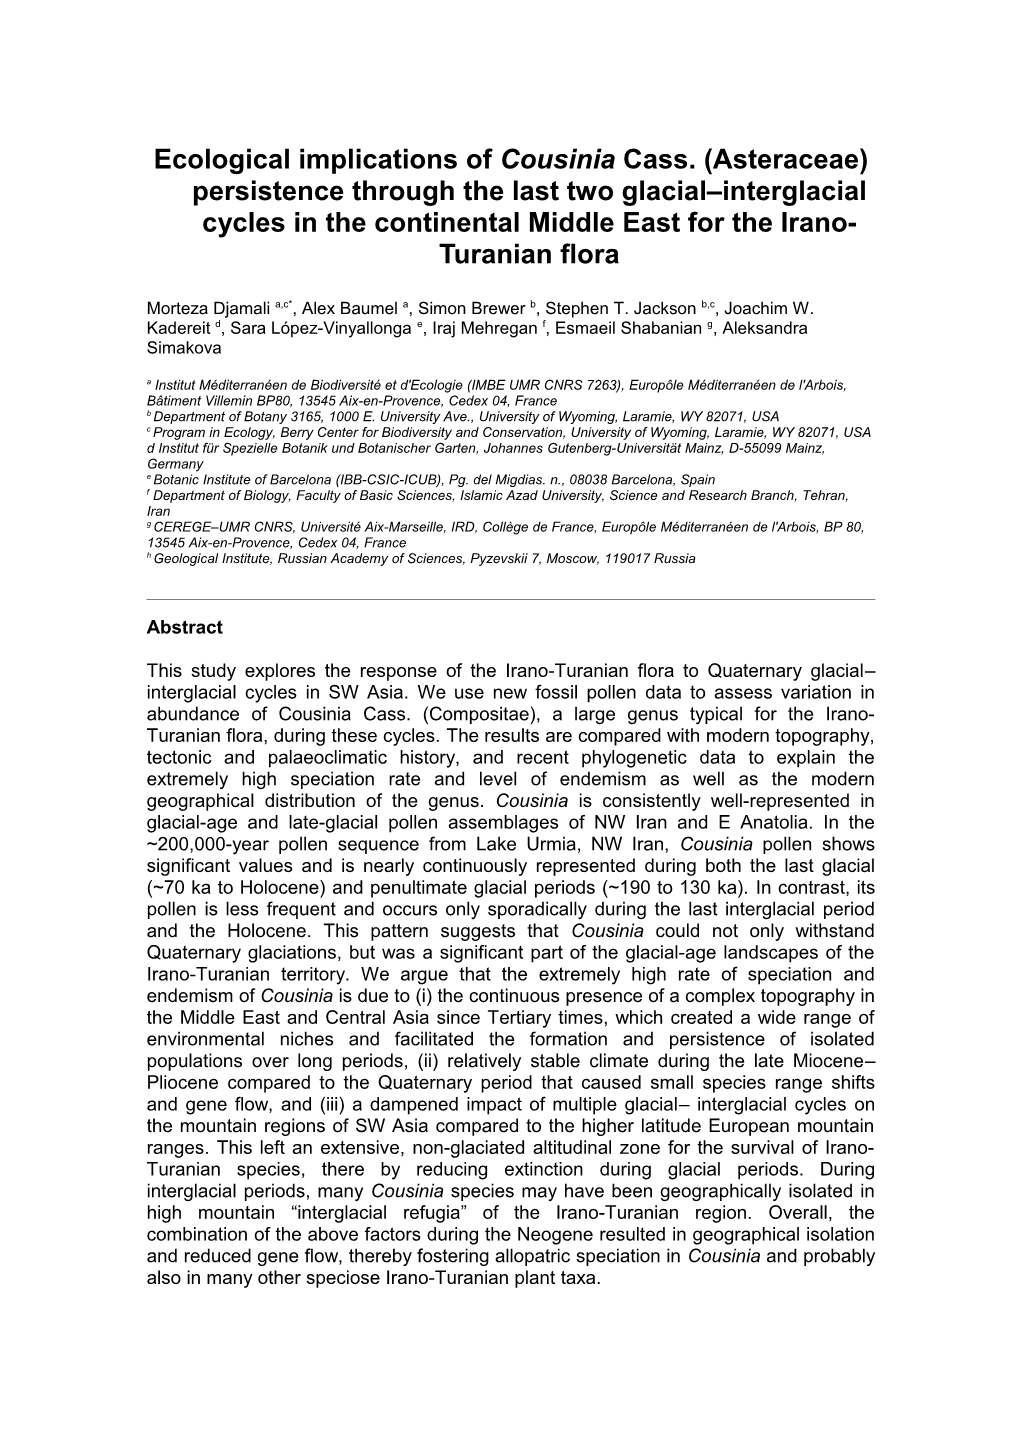 Ecological Implications of Cousinia Cass.(Asteraceae) Persistence Through the Last Two Glacial–Interglacial Cycles in the Continental Middle East for the Irano-Turanian Flora